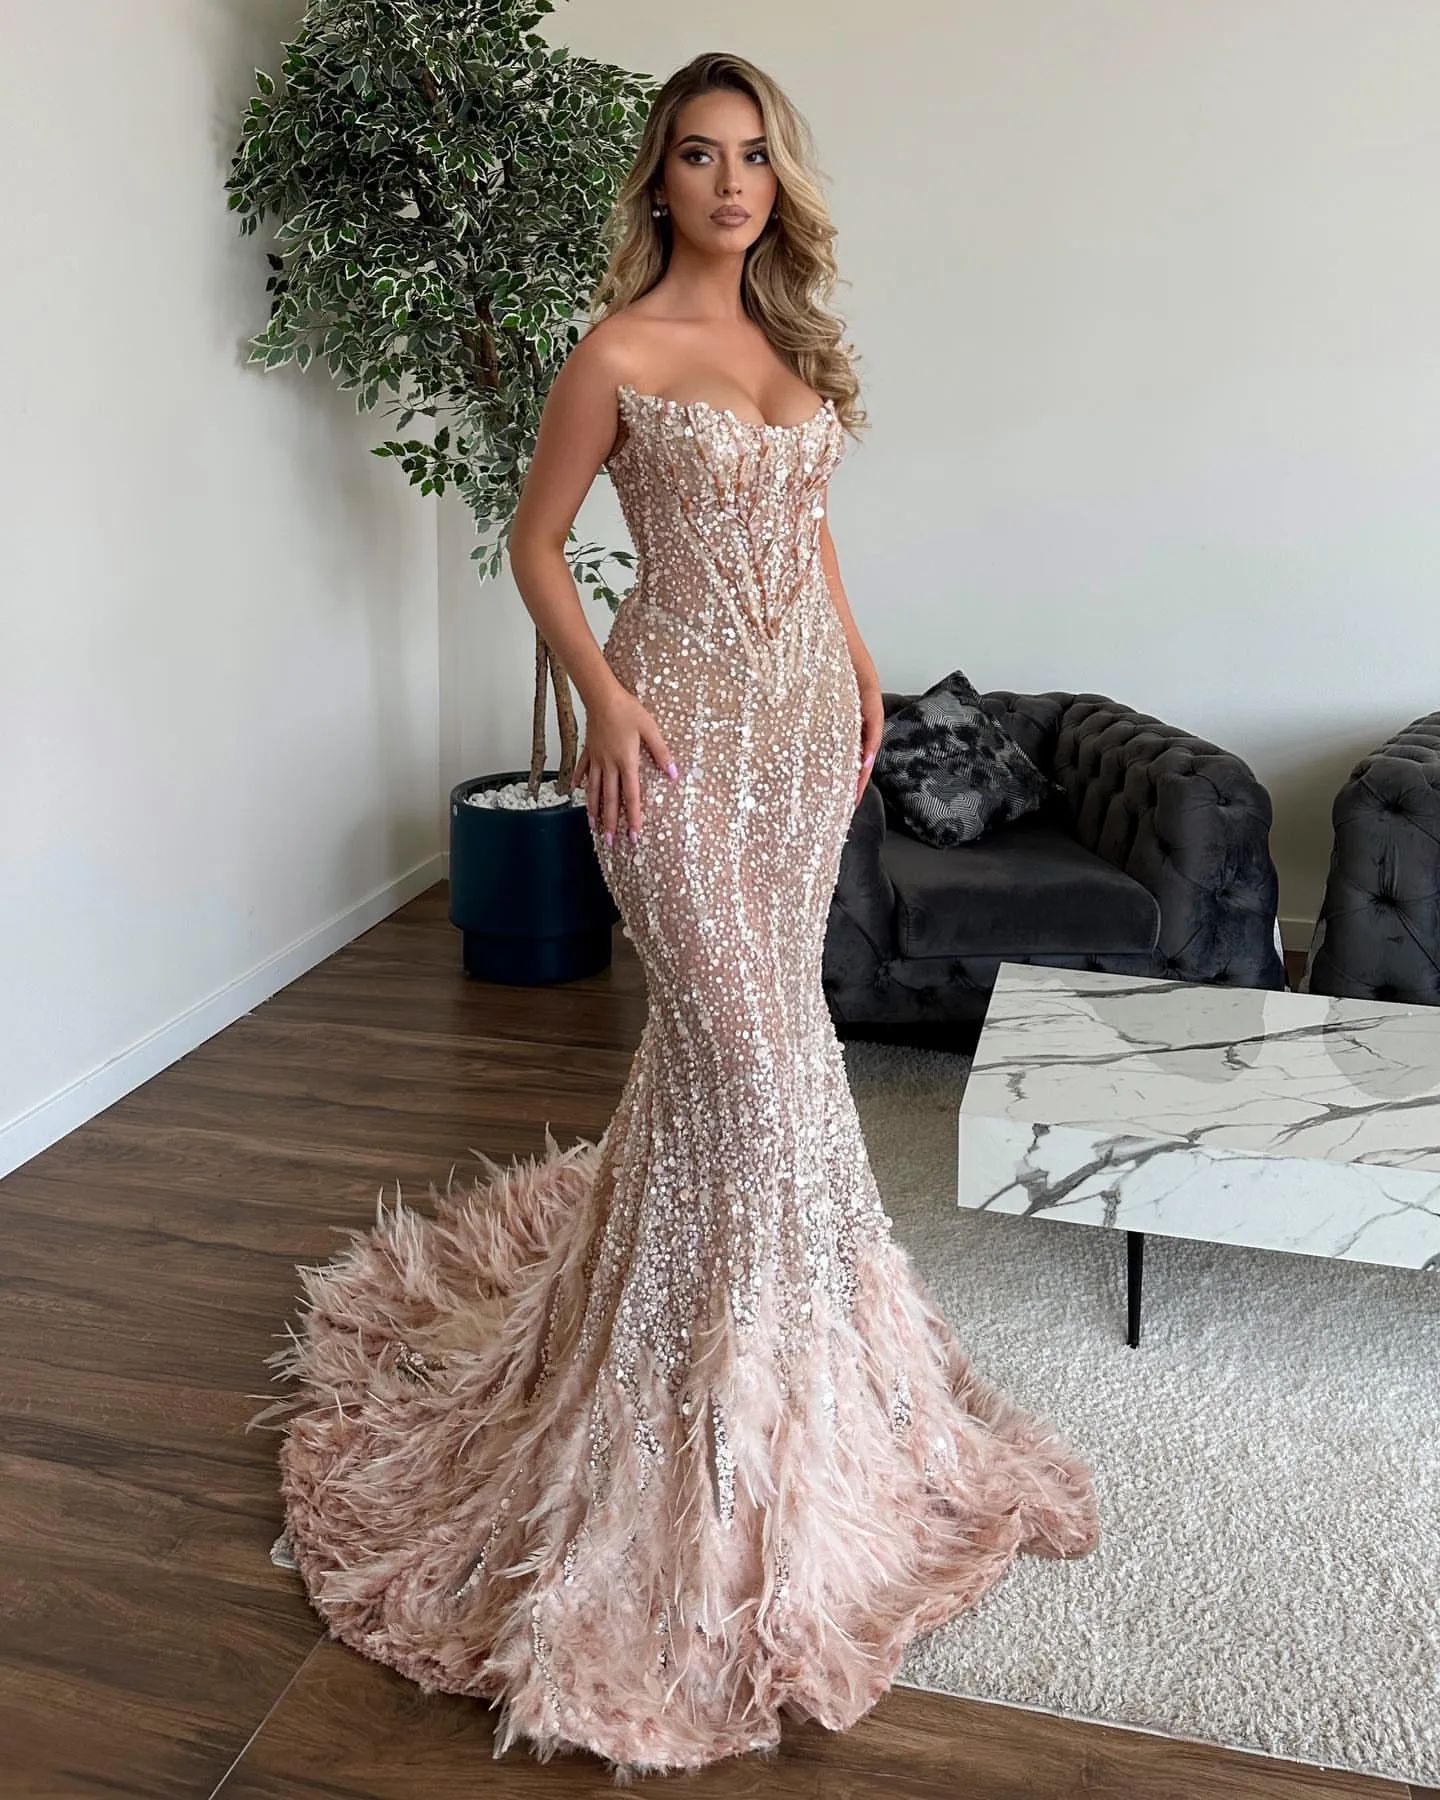 Oknass Shining Off-the-Shoulder Sequins Mermaid Prom Dress with Feathers